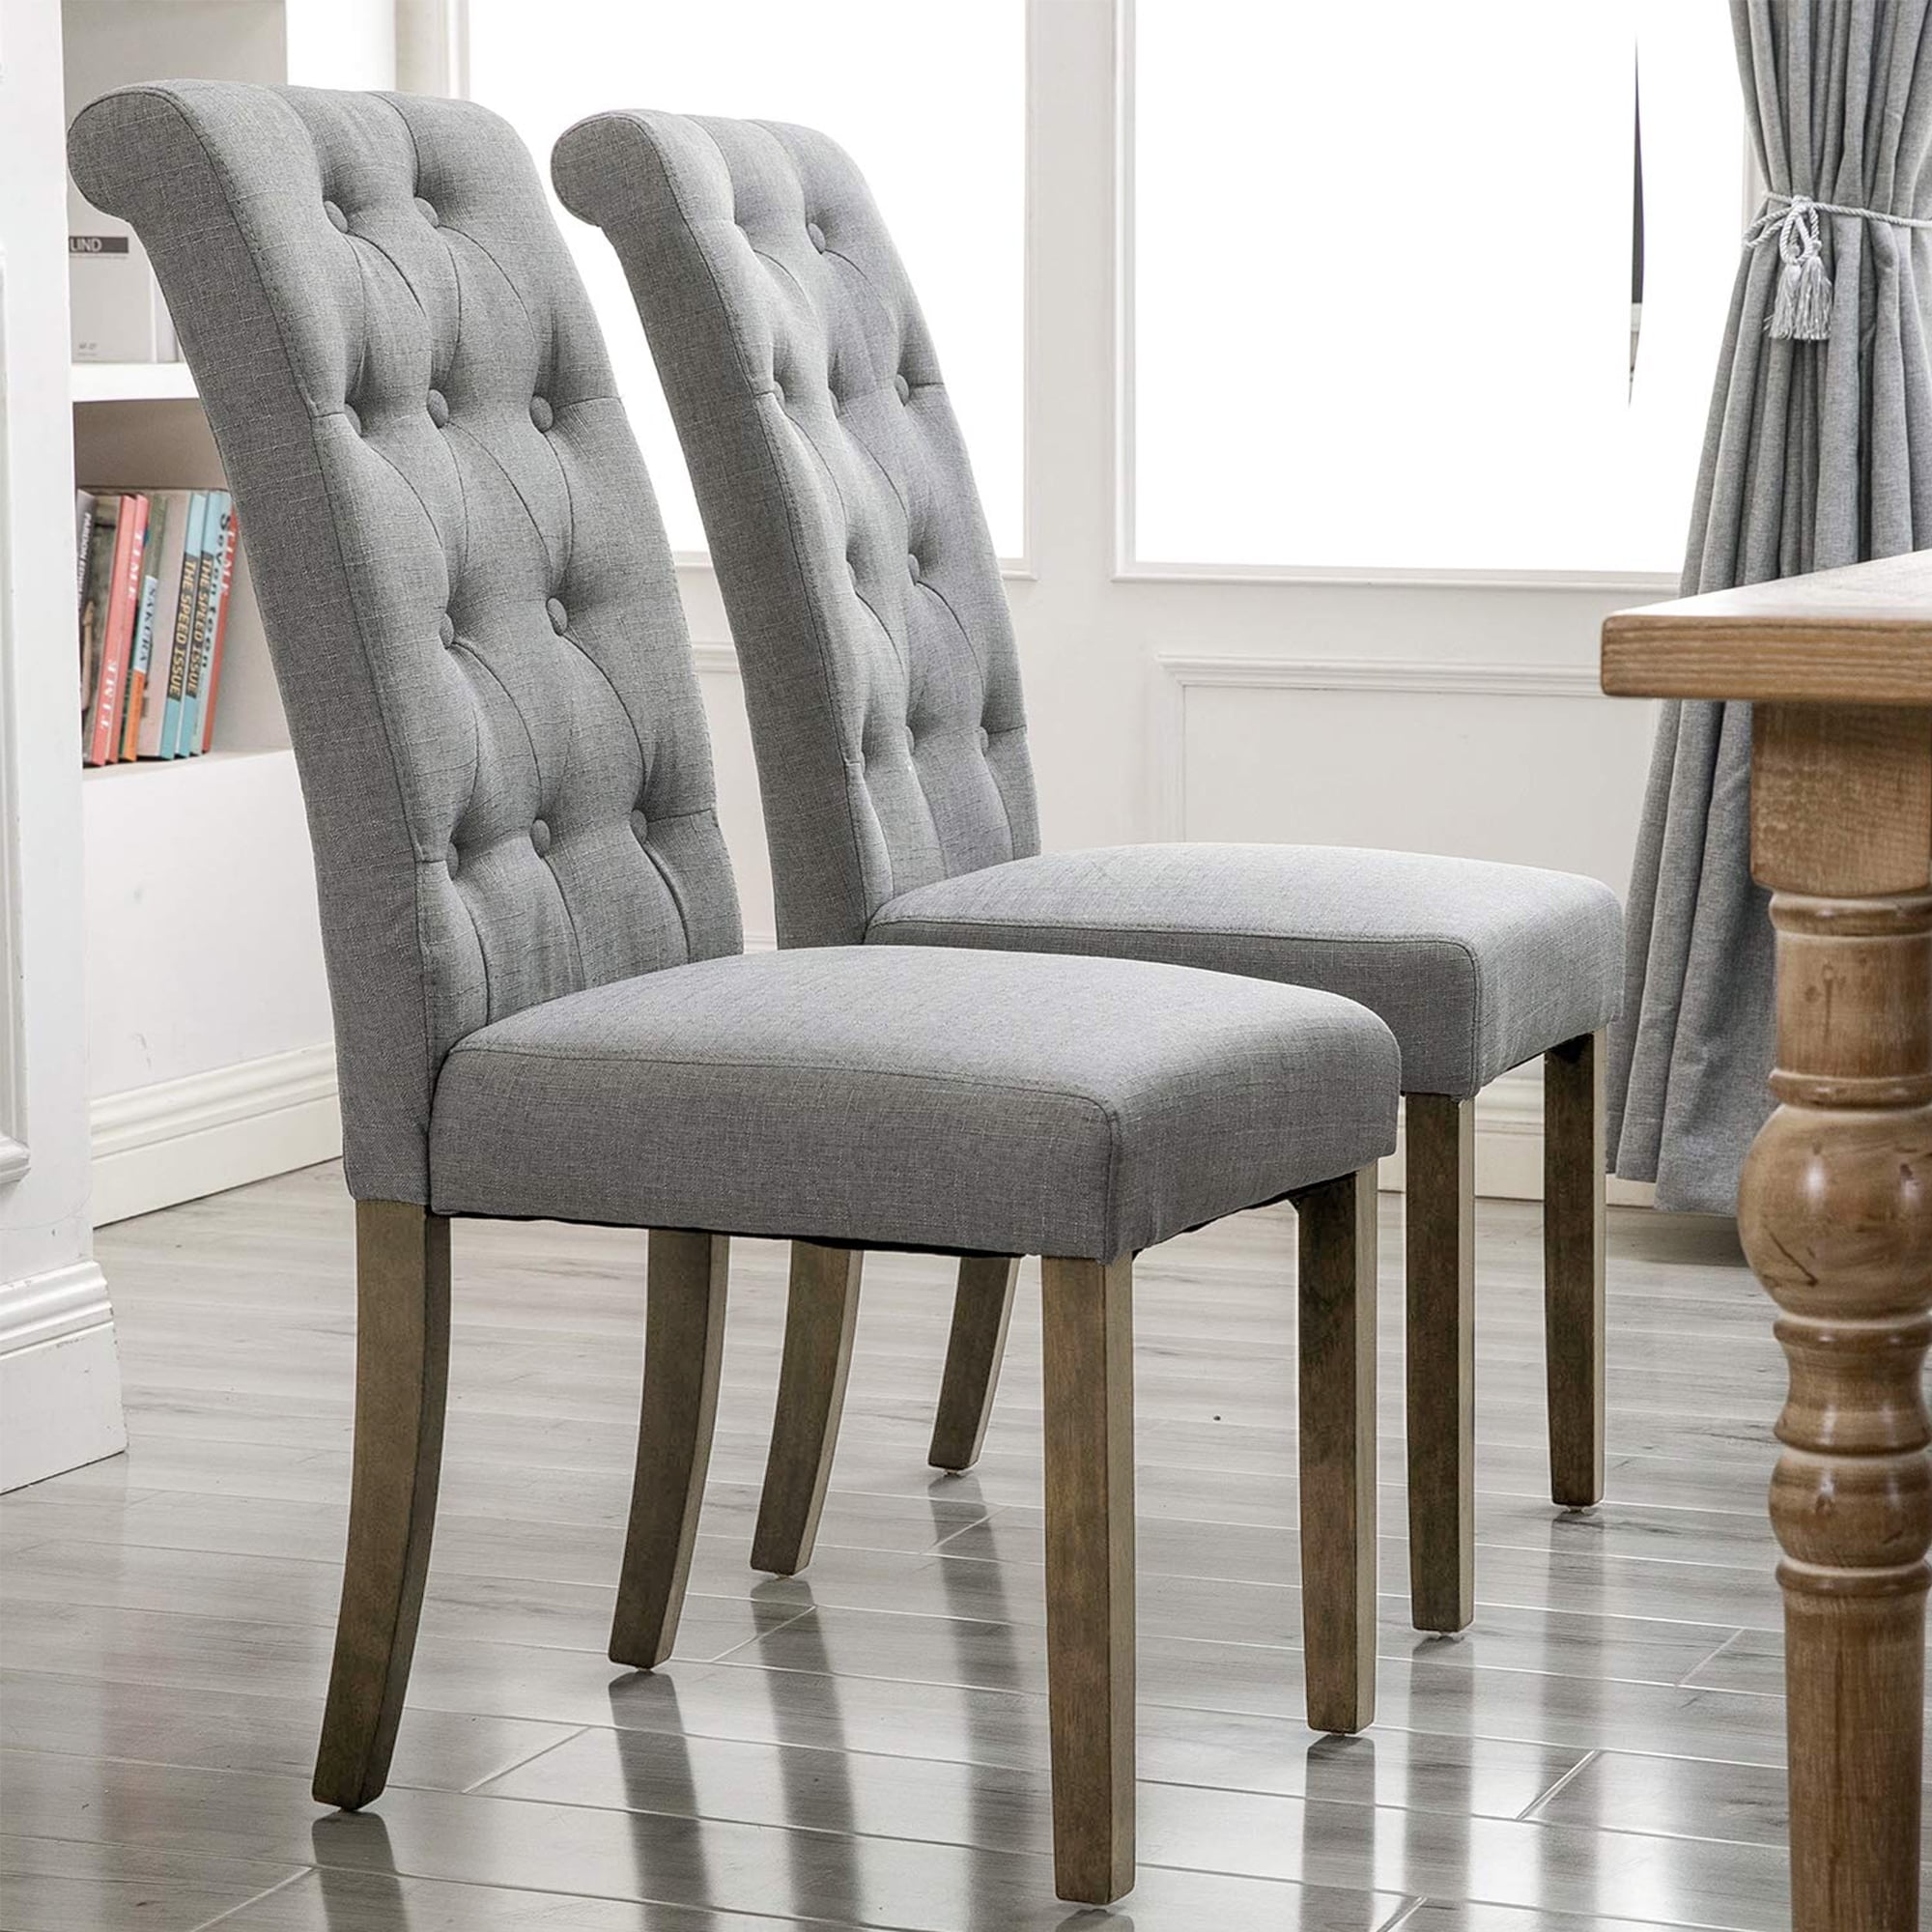 Solid Wood with Fabric Kitchen Lounge Restaurant Home Dining Chairs 